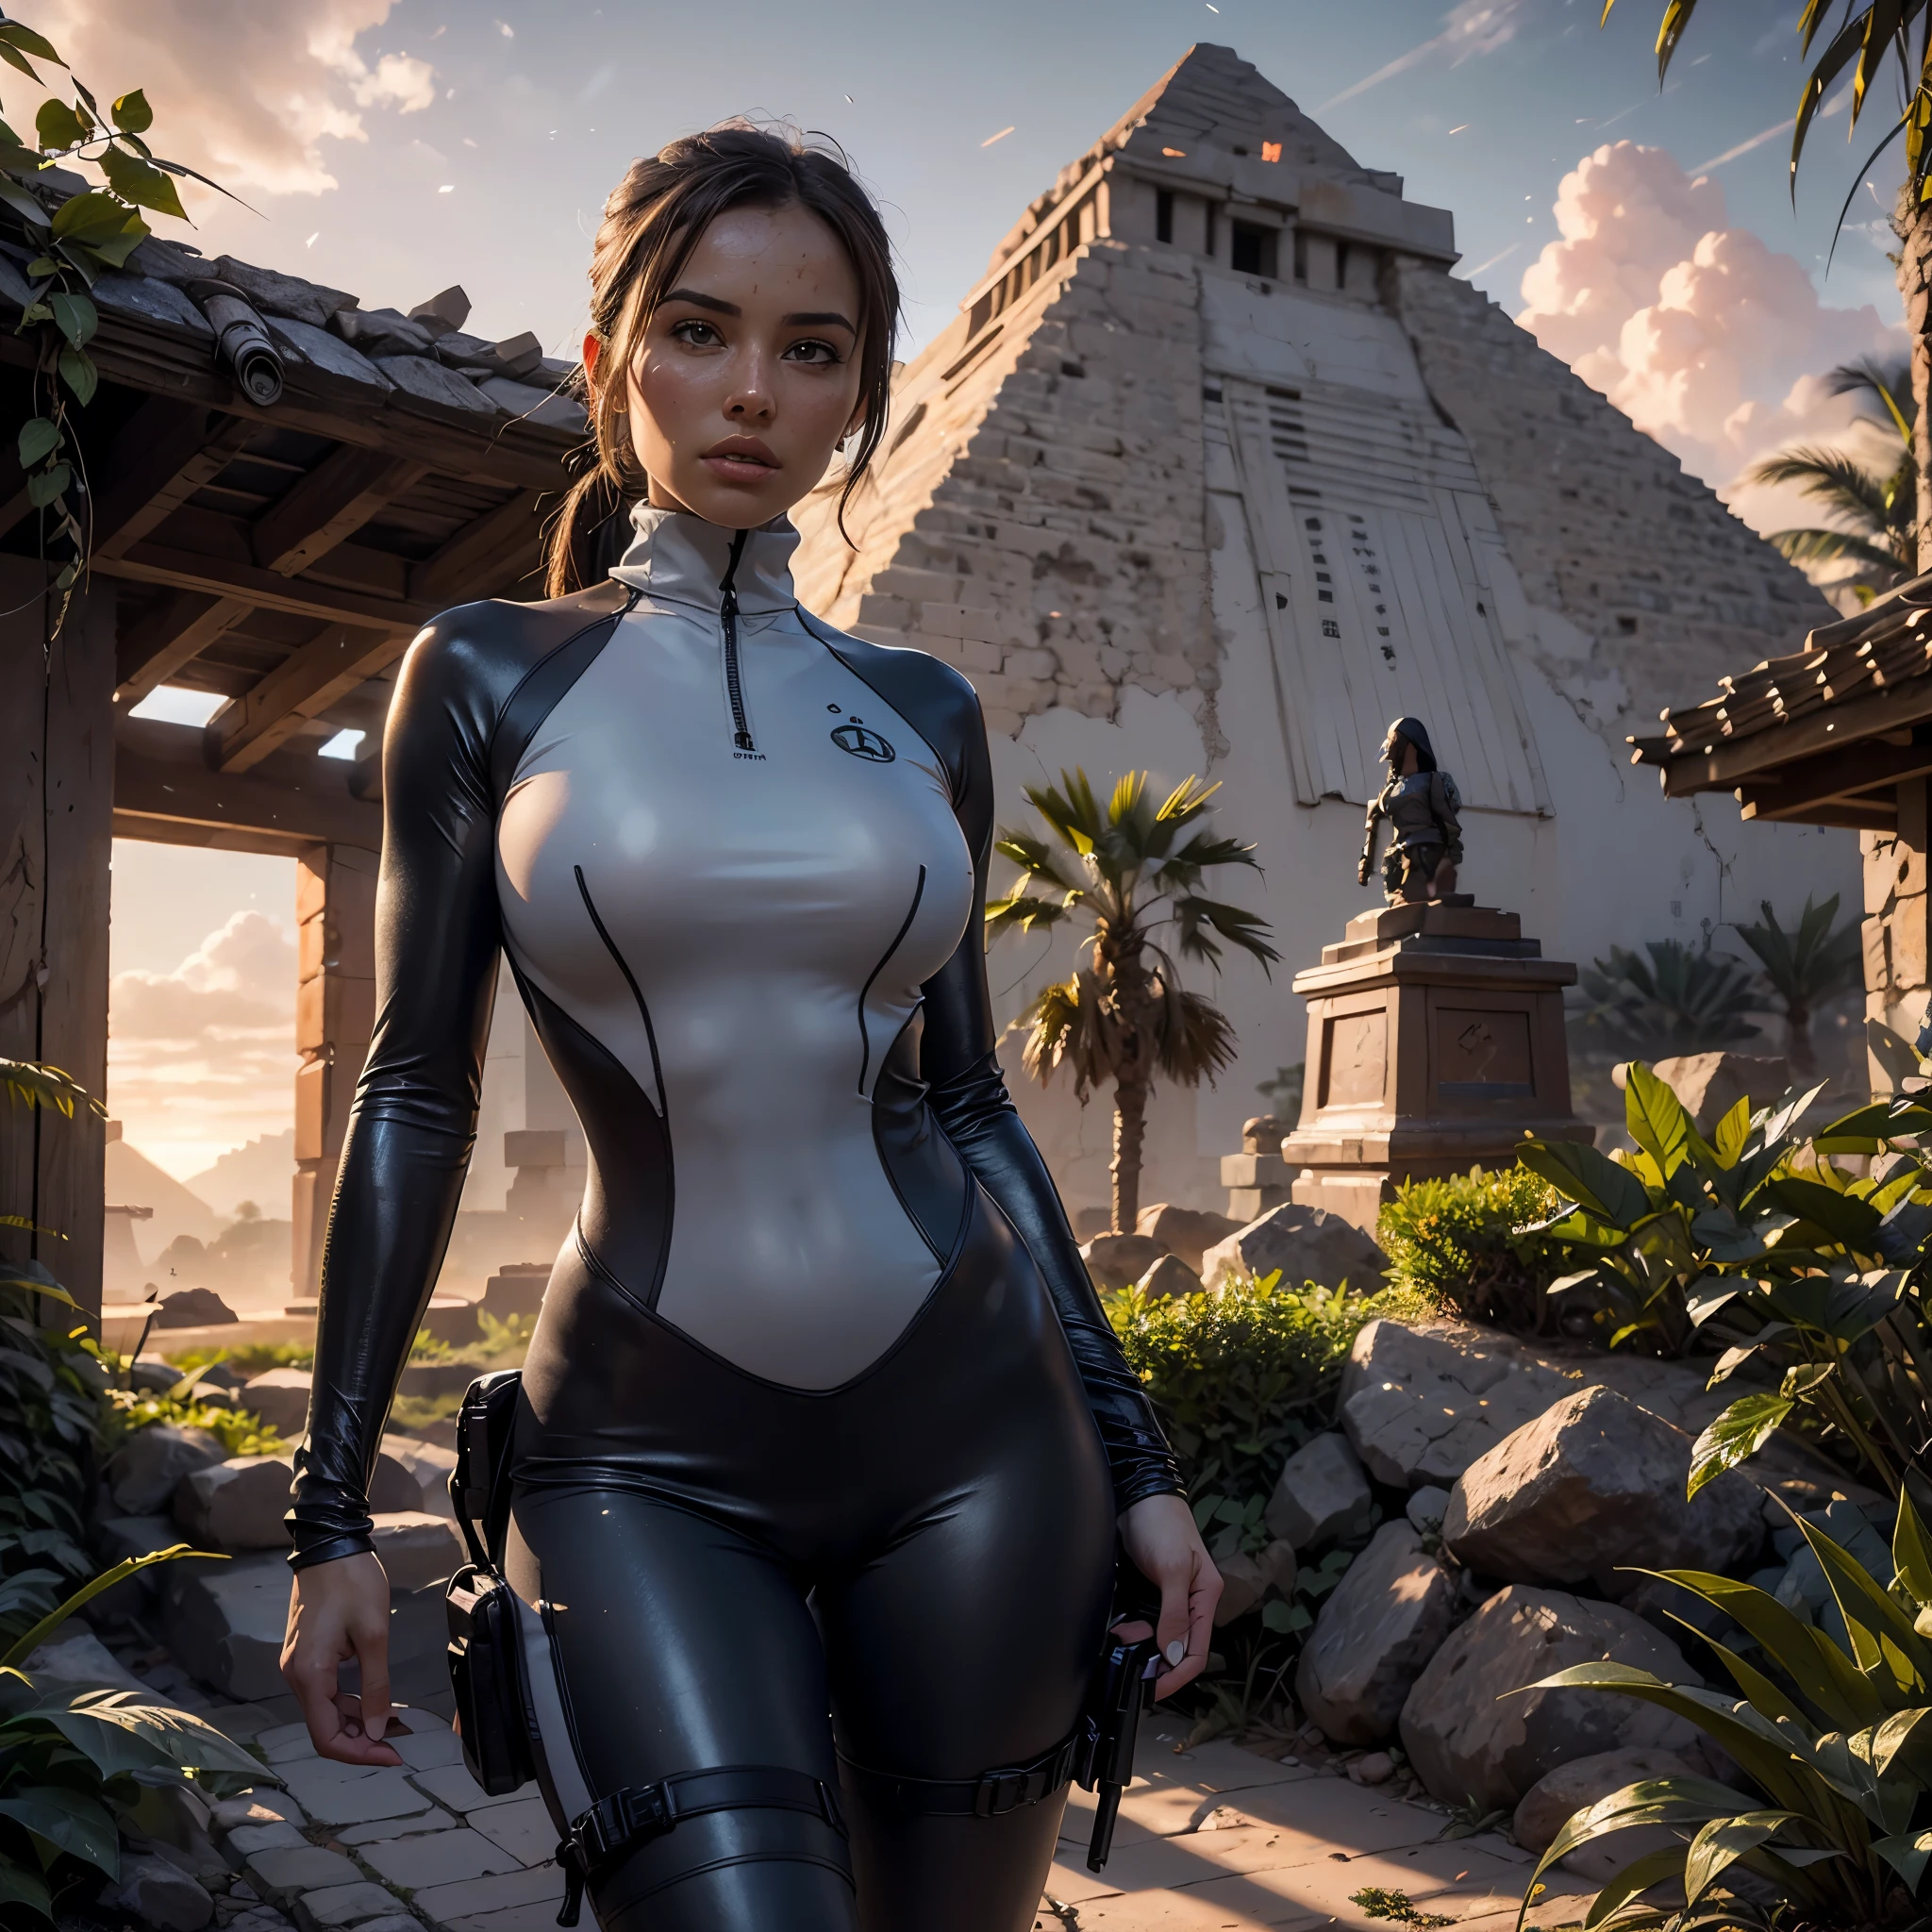 (1girl), arafed woman as Lara Croft Tomb Raider，(wearing a grey silver rubber turtleneck wetsuit:1.3), athletic body, (9mm guns in thigh holsters) posing in an ancient egyptian oasis, pyramids in background, jungle plants, jungle flowers, raging fires in background, (late sunset setting:1.15), tropical birds in sky, attack helicopter in sky, wet skin, photoreal render，dynamic pose, action pose, high contrast image, rendering by octane，zbrush。character design，realisticlying，unreal-engine，ultra - detailed，concept-art，trends in art station。 ((best quality)), ((masterpiece)), ((realistic)), (detailed), brown eyes, highly detailed skin and hair, looking at the viewer, Fantasy art，stunning gradient colors，detailed background，extremely detaile, tmasterpiece)，detailed background, HDR,